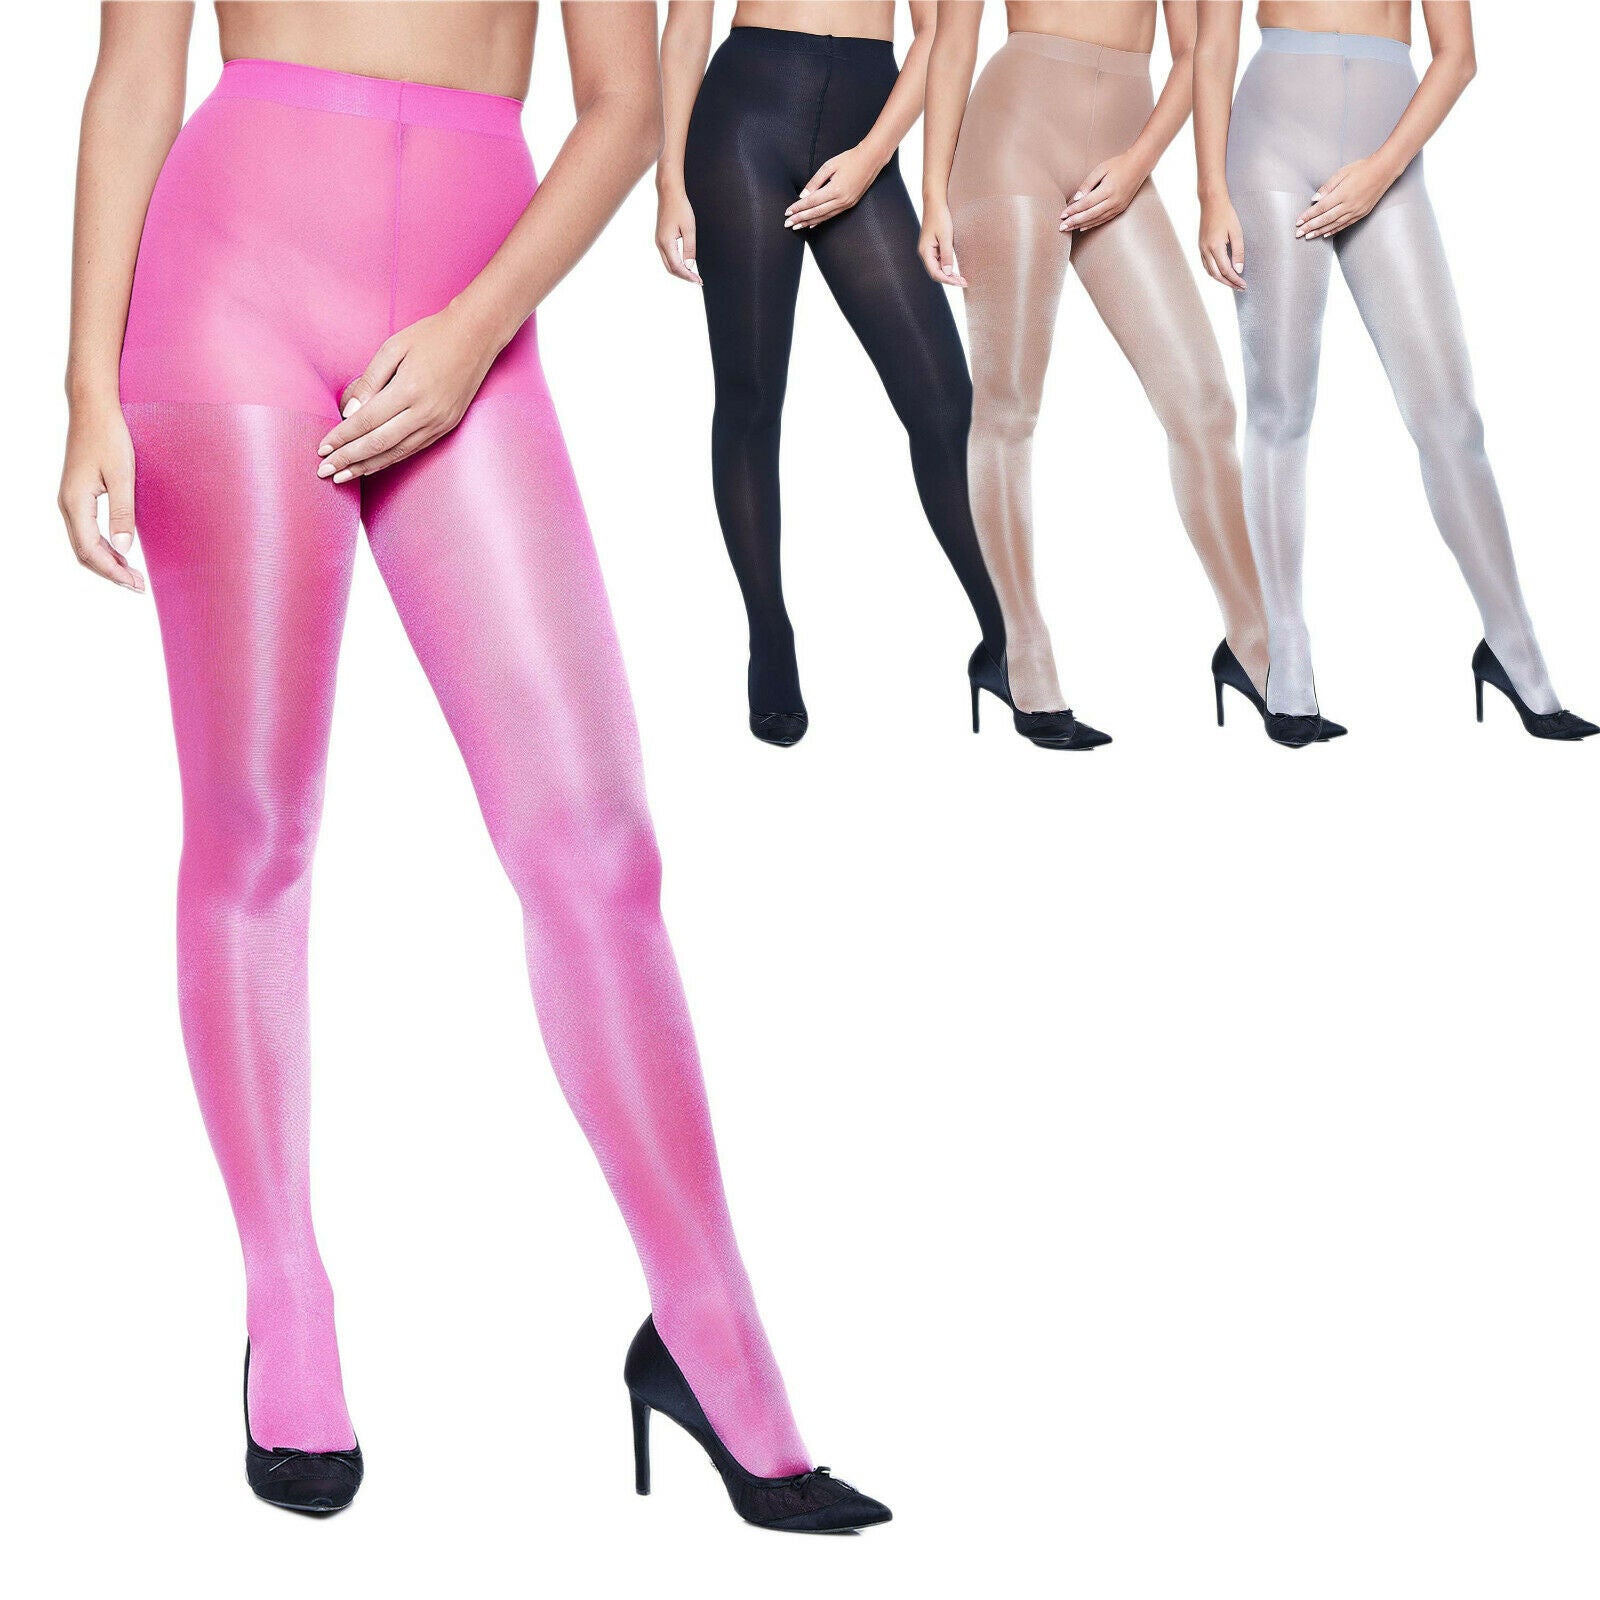 Miss O Coloured Opaque Gloss Crotchless Tights